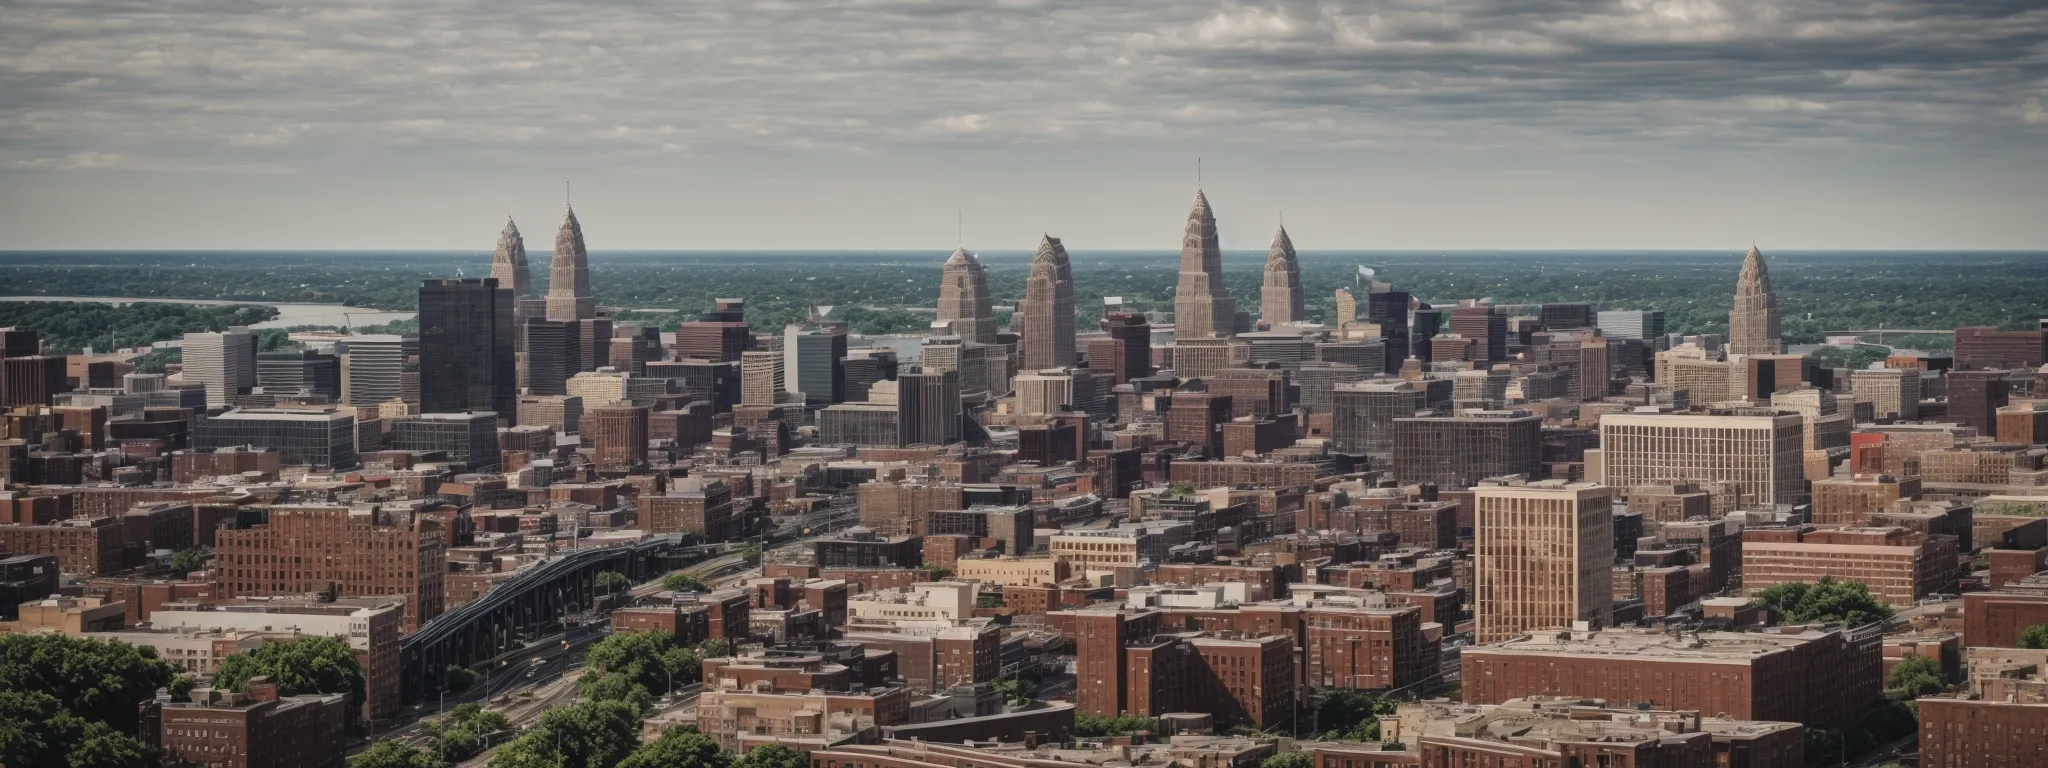 a panoramic view of cleveland's skyline illustrating the bustling urban landscape where digital marketing campaigns thrive.